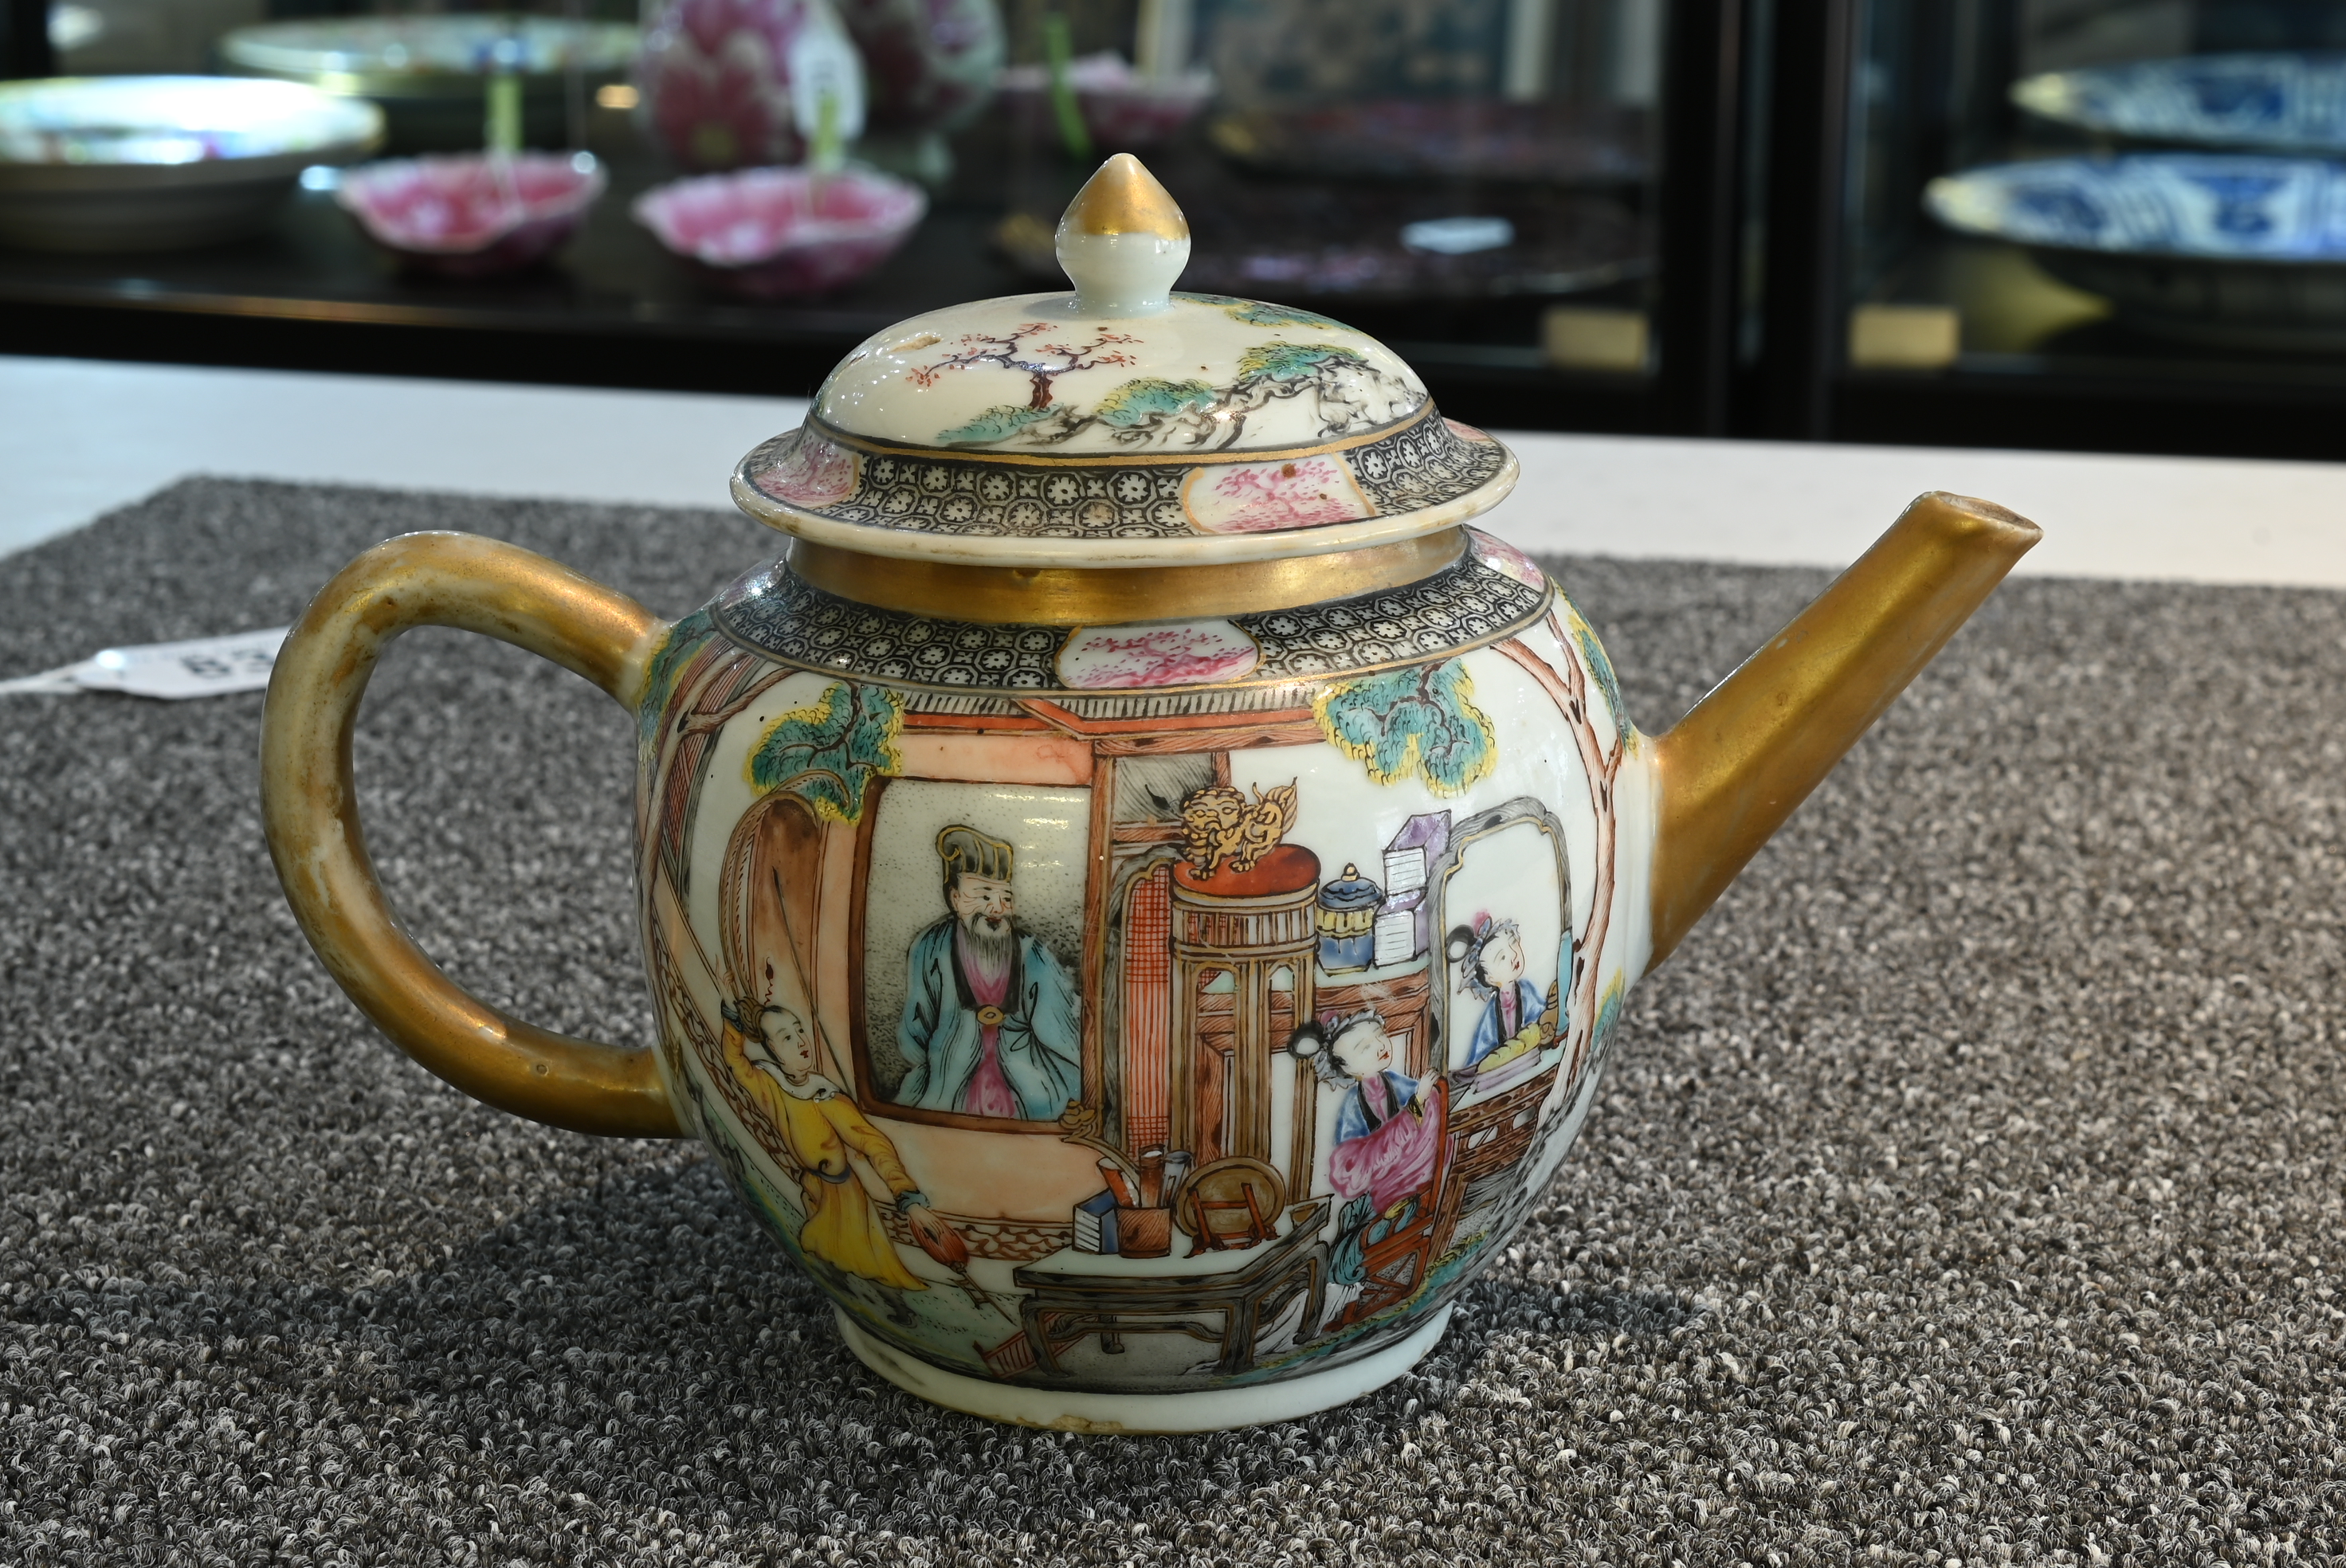 A FINE CHINESE FAMILLE ROSE PORCELAIN TEAPOT, 18TH CENTURY - Image 11 of 21